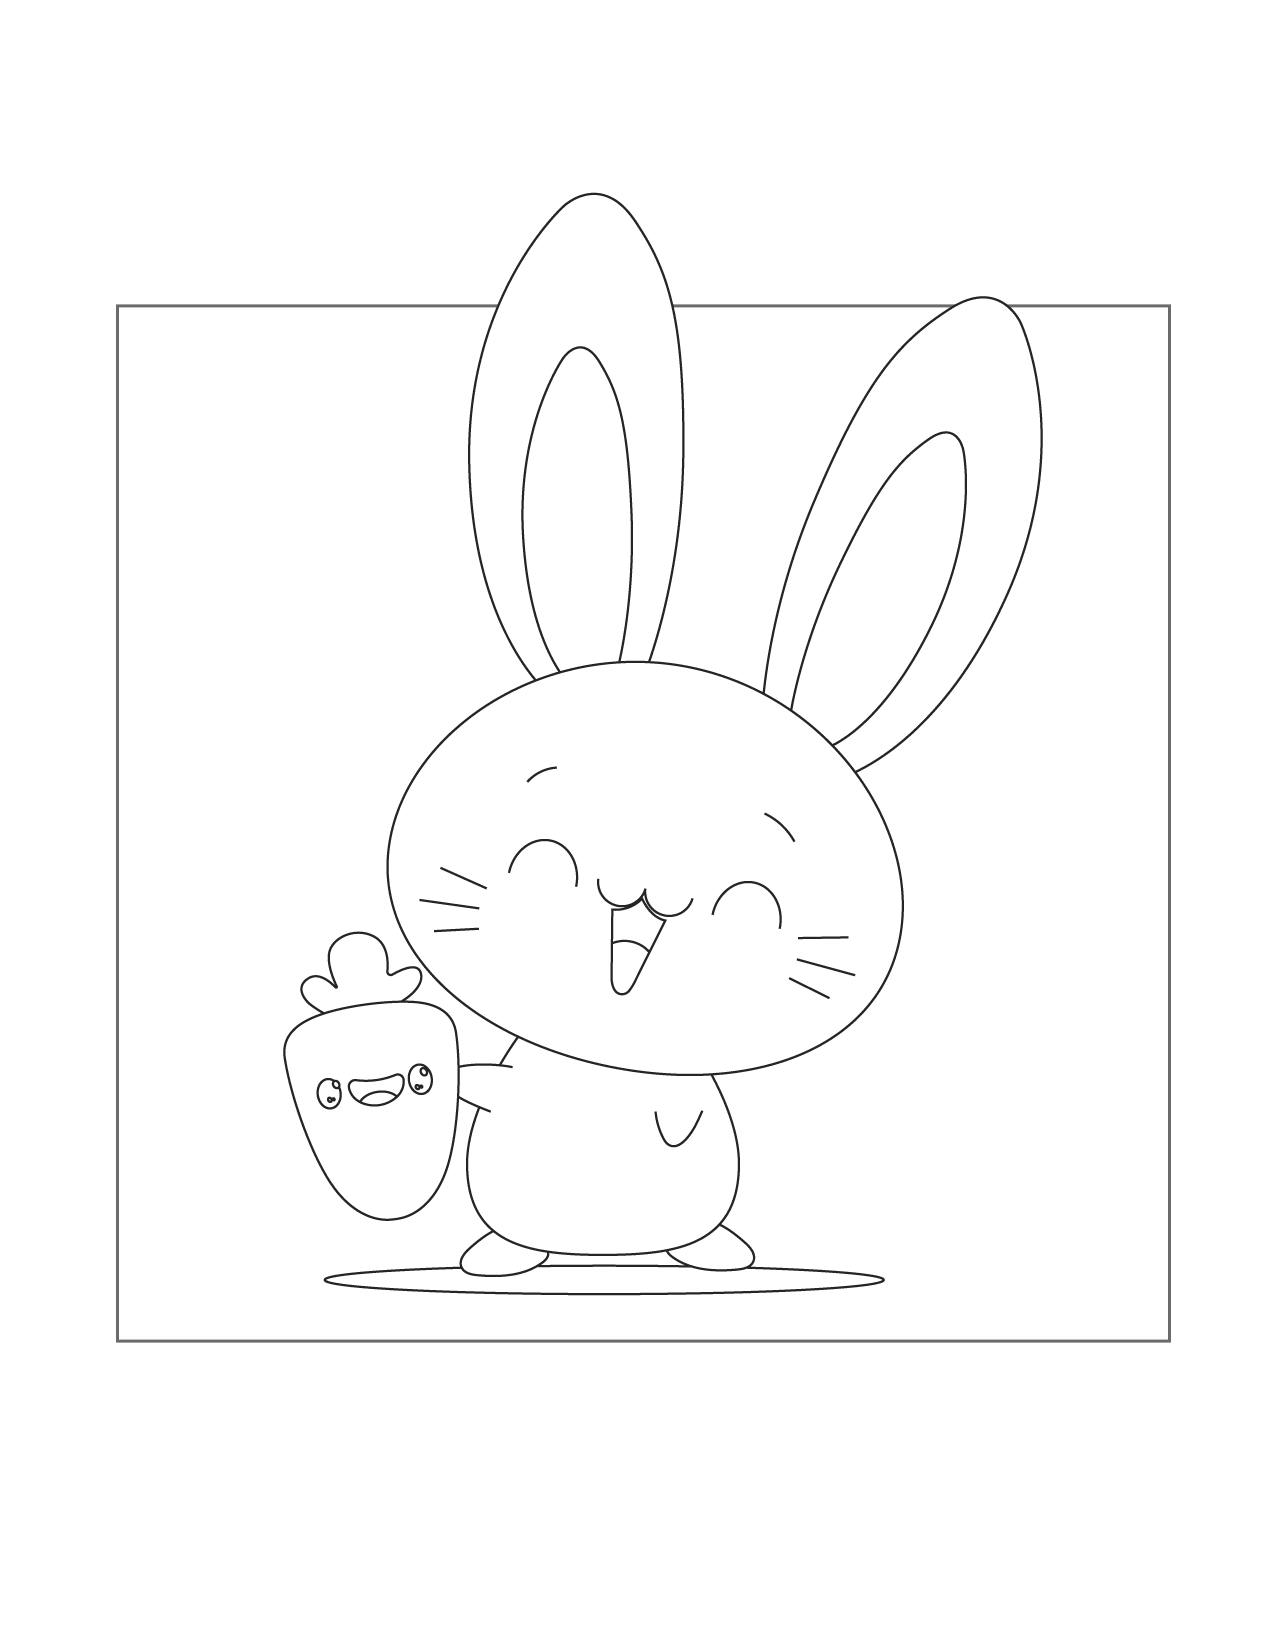 Rabbit And Carrot Coloring Page